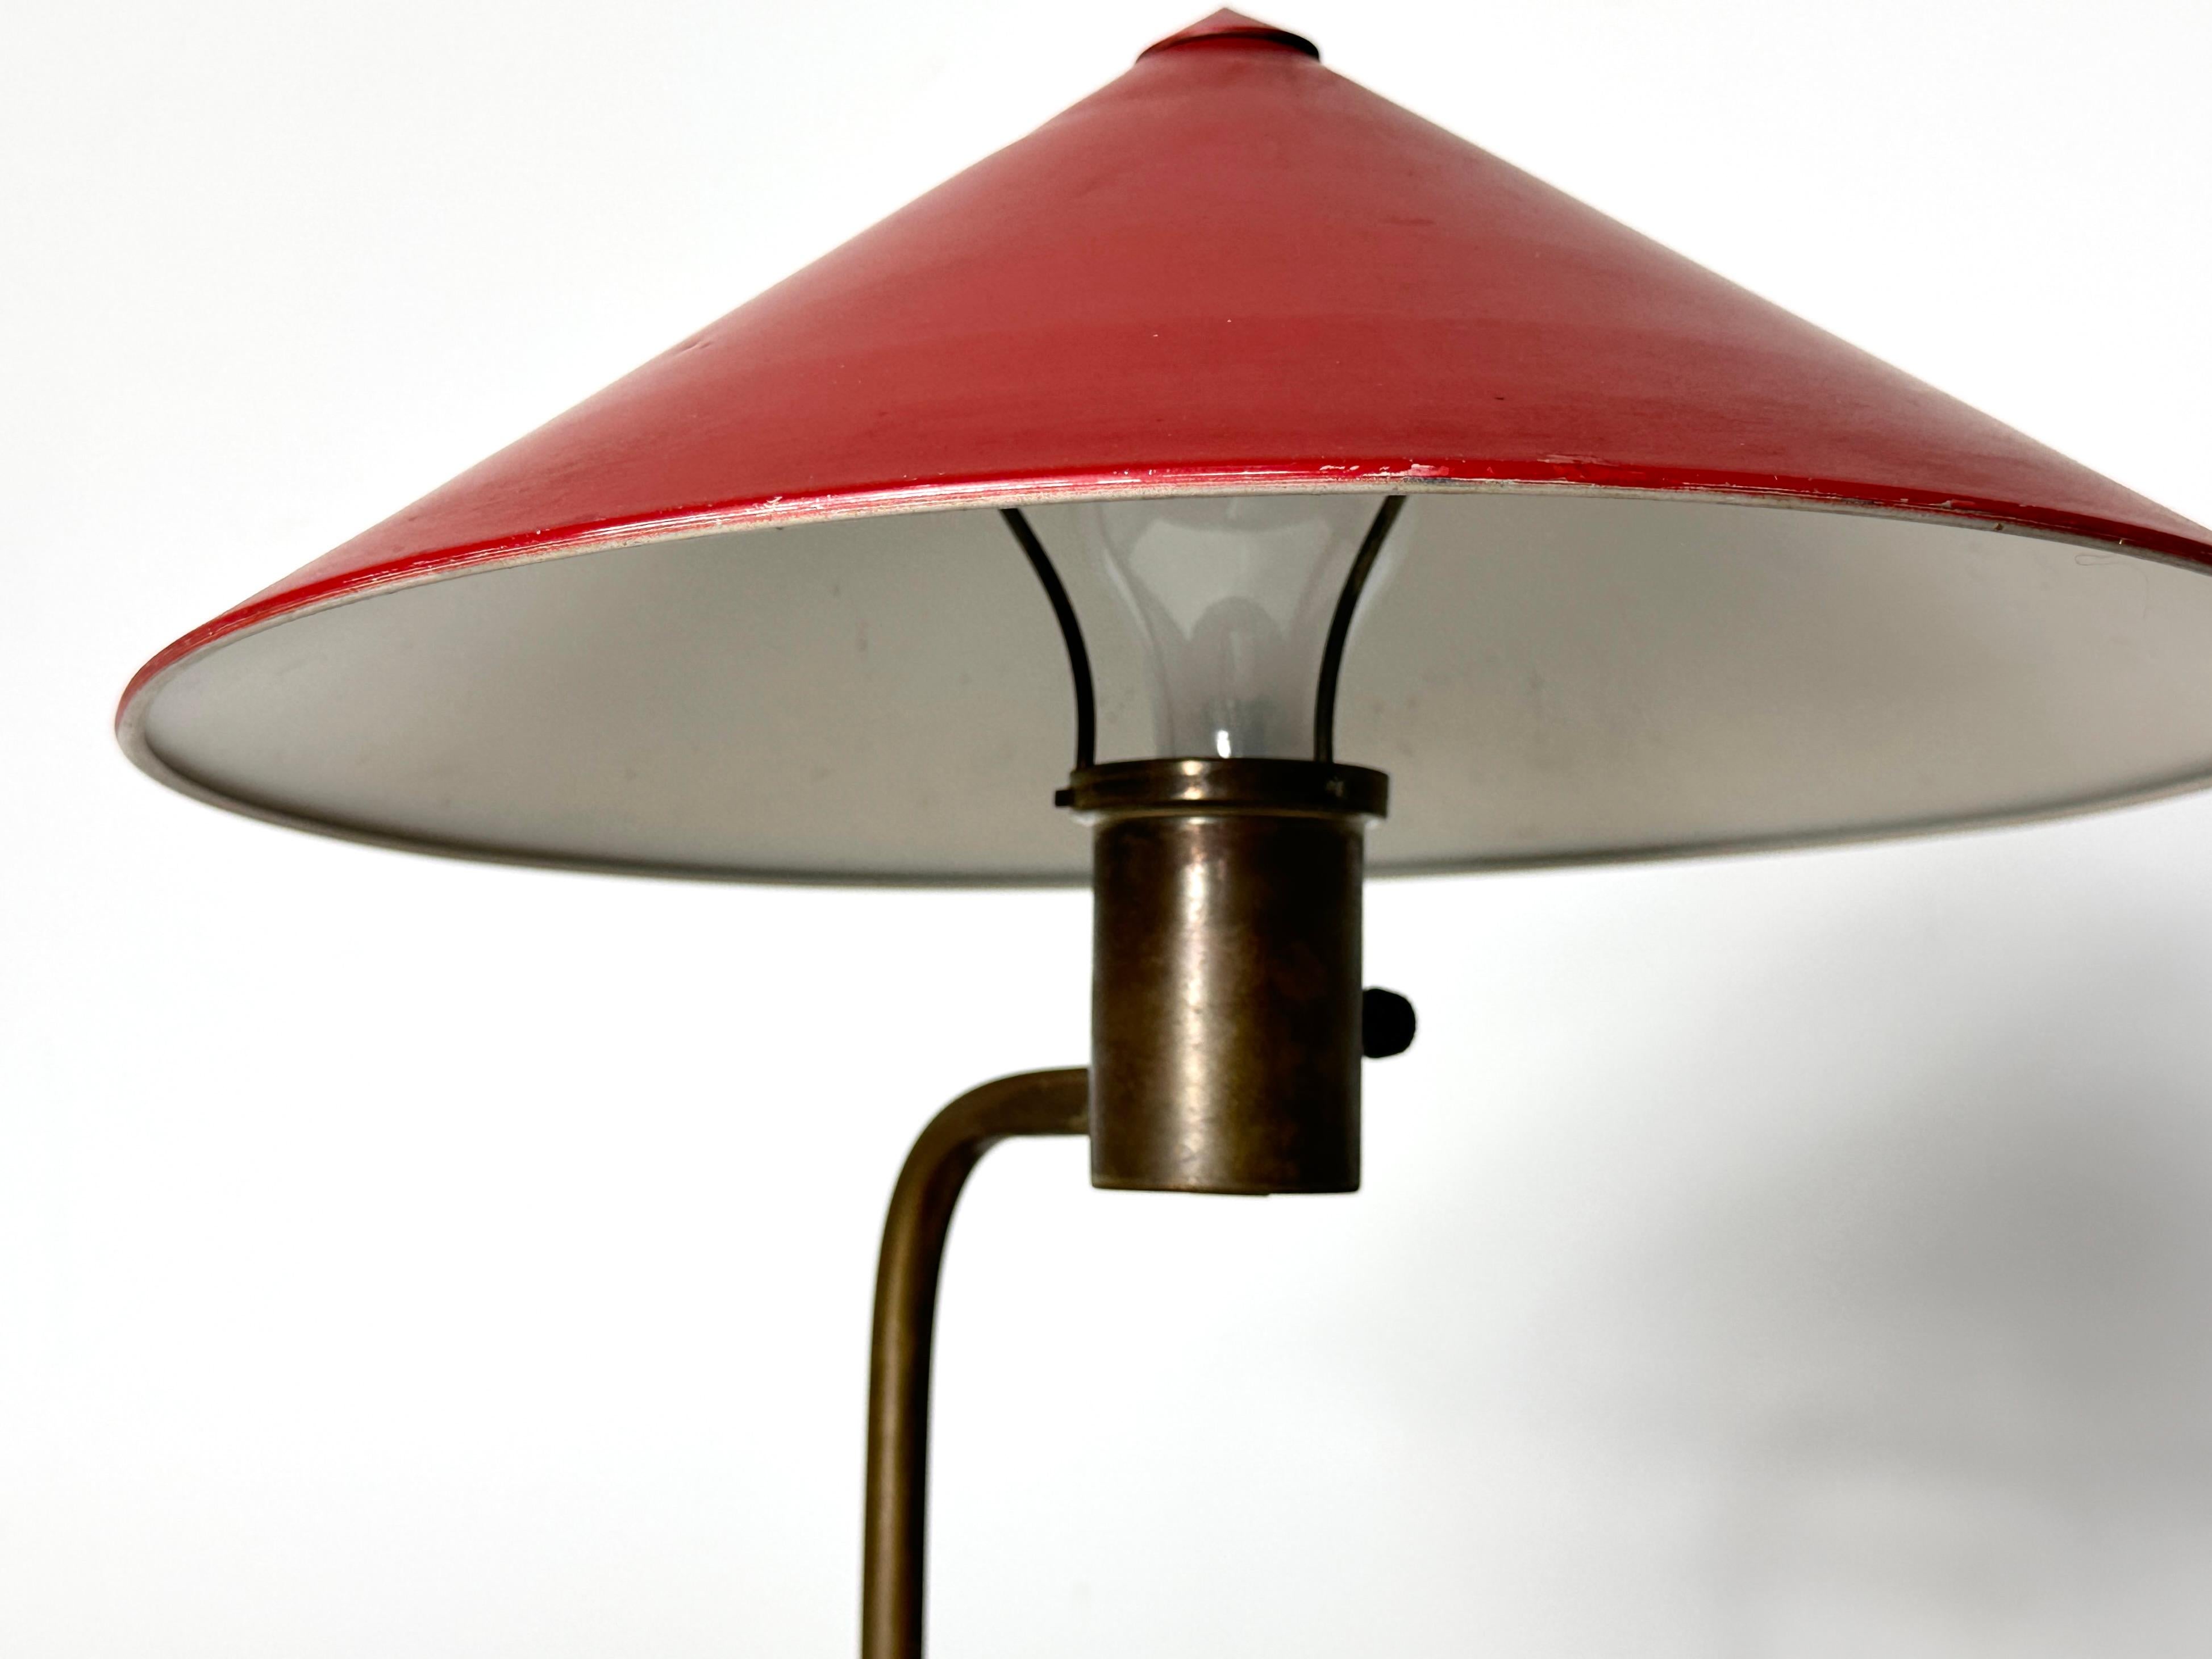 Walter Von Nessen Red Enamel and Brass Table Lamp 1930s Art Deco For Sale 4